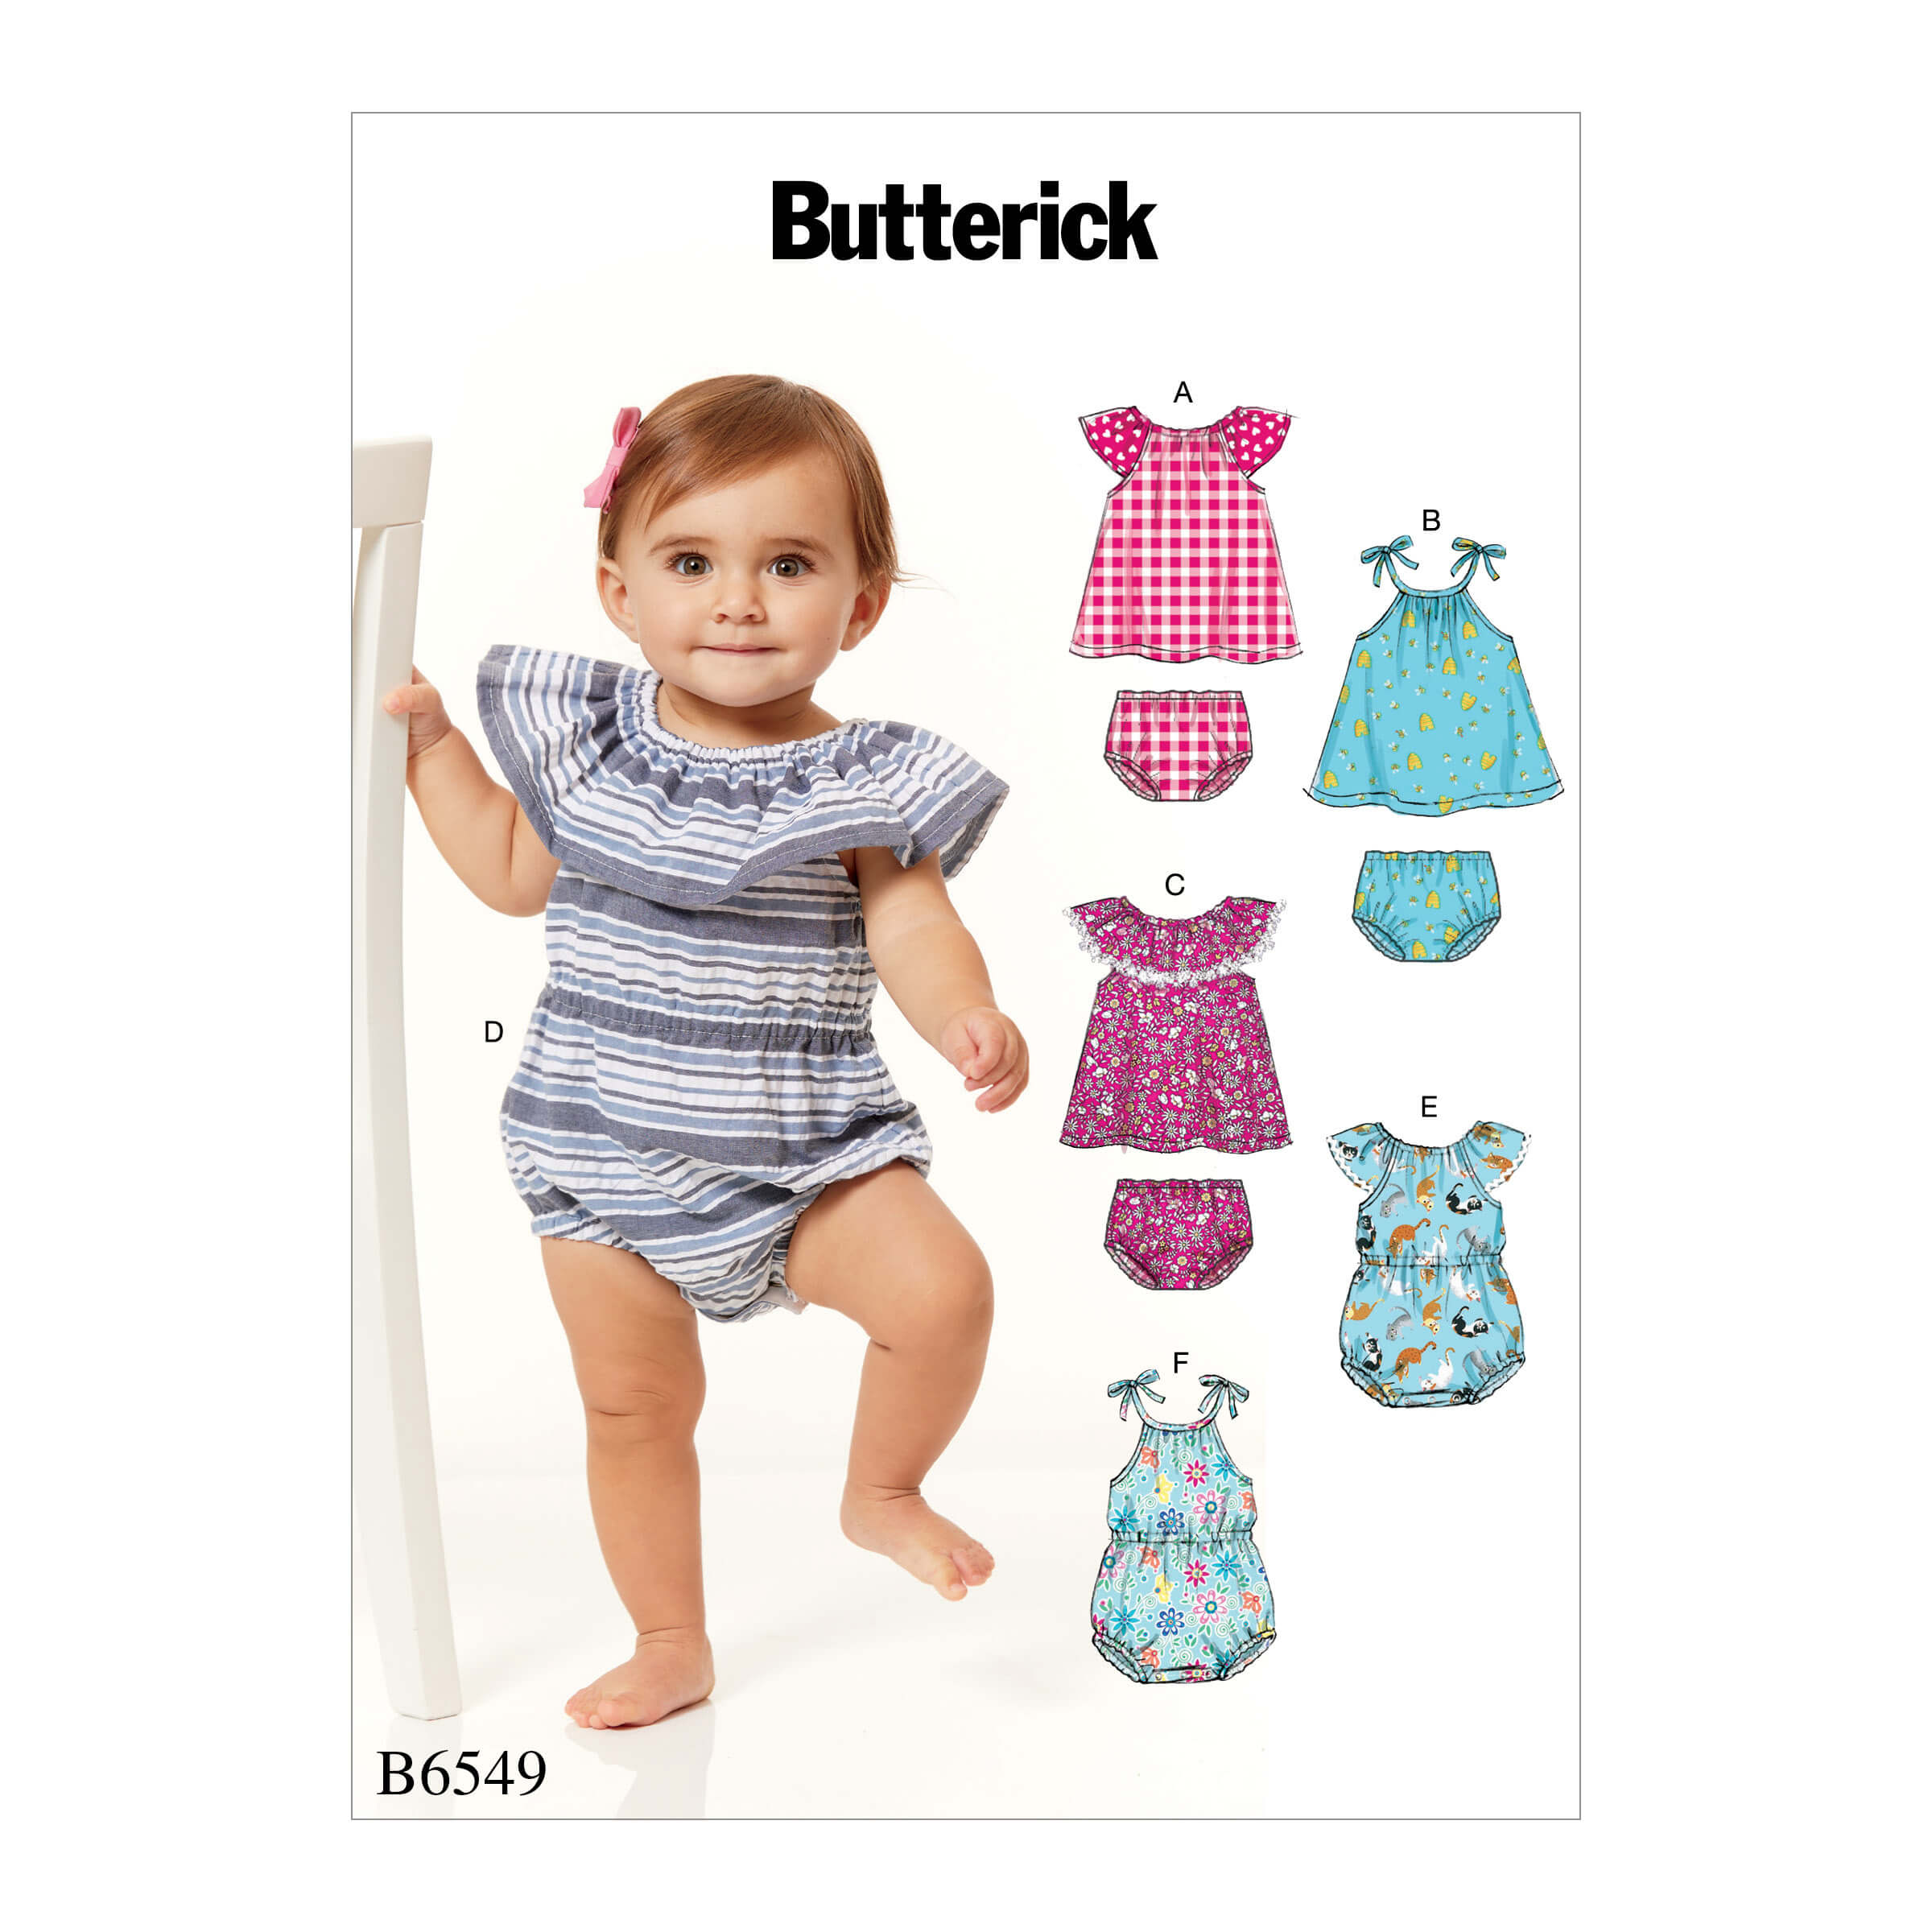 Butterick Sewing Pattern B6549 Infants Romper, Dress and Panties